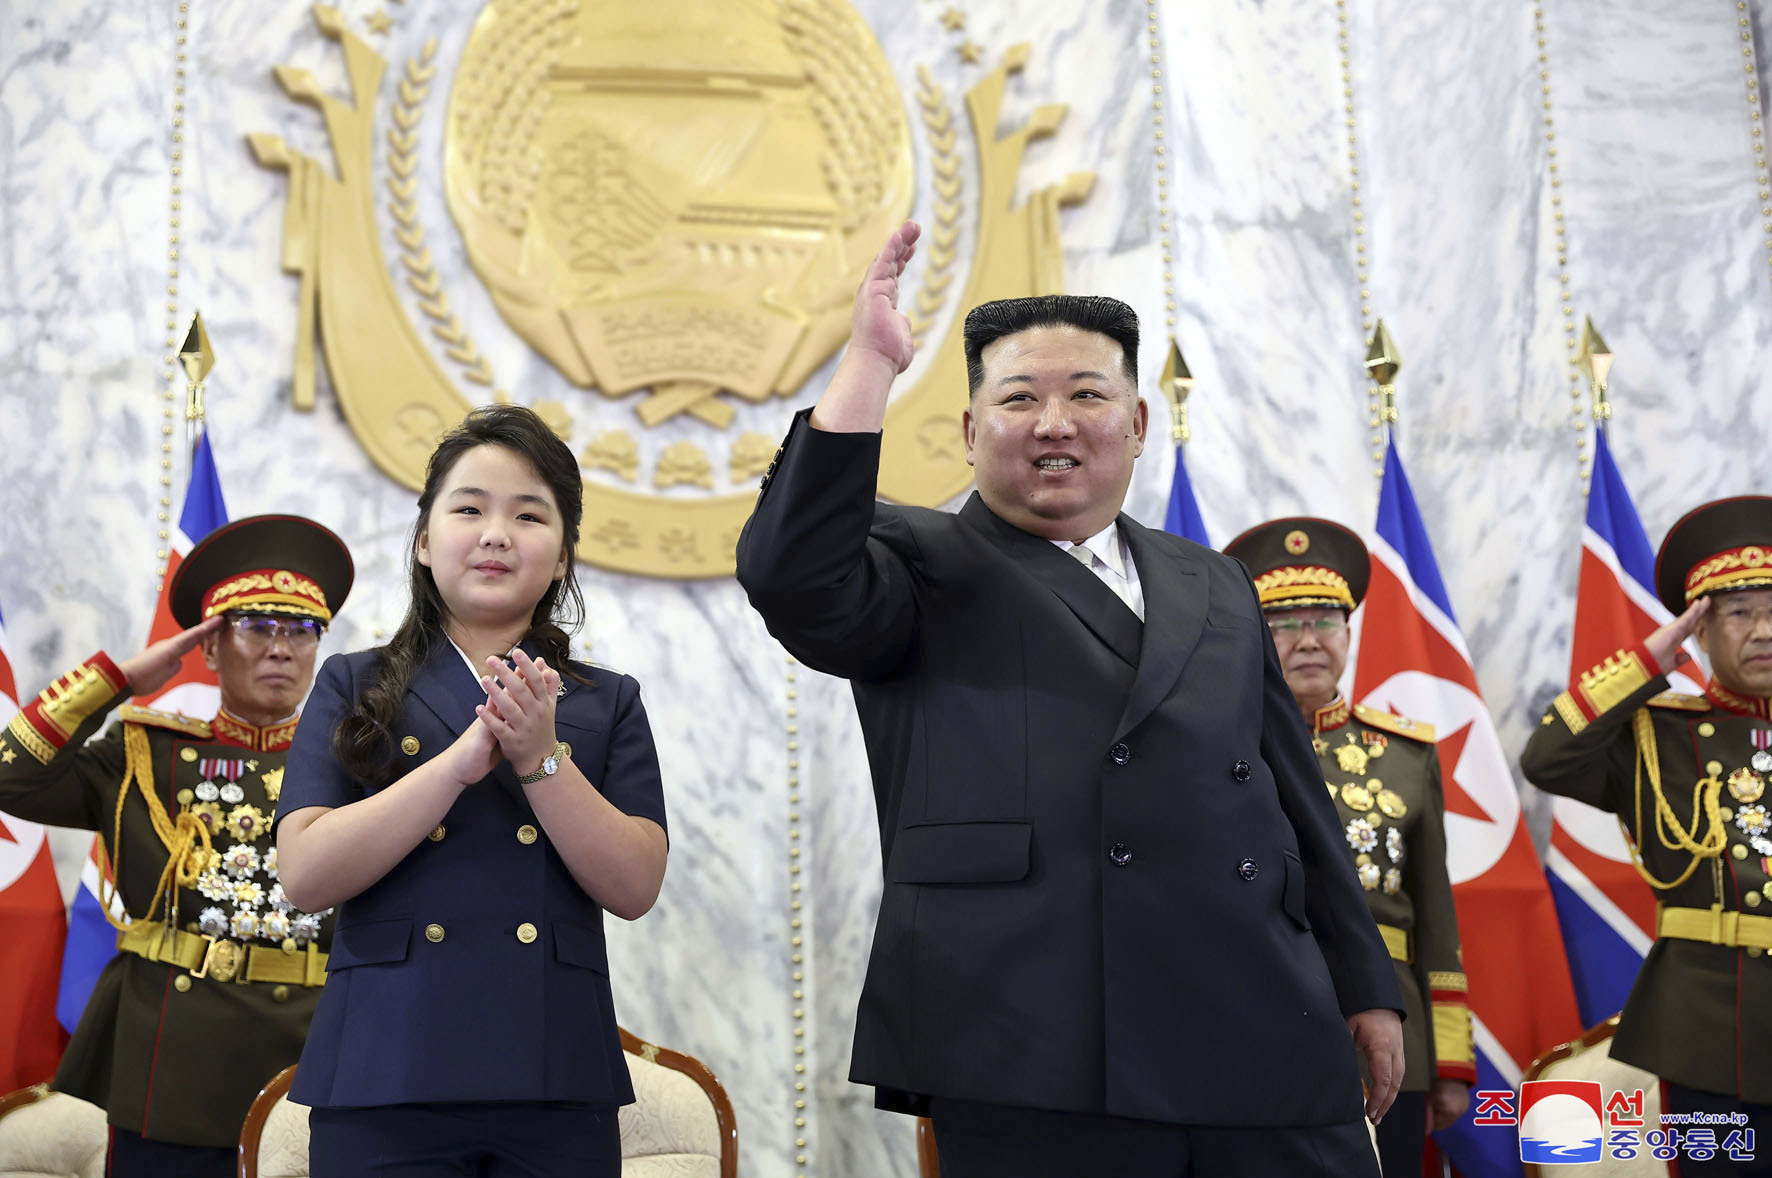 Leader Kim Jong Un (right) attends the parade with his daughter